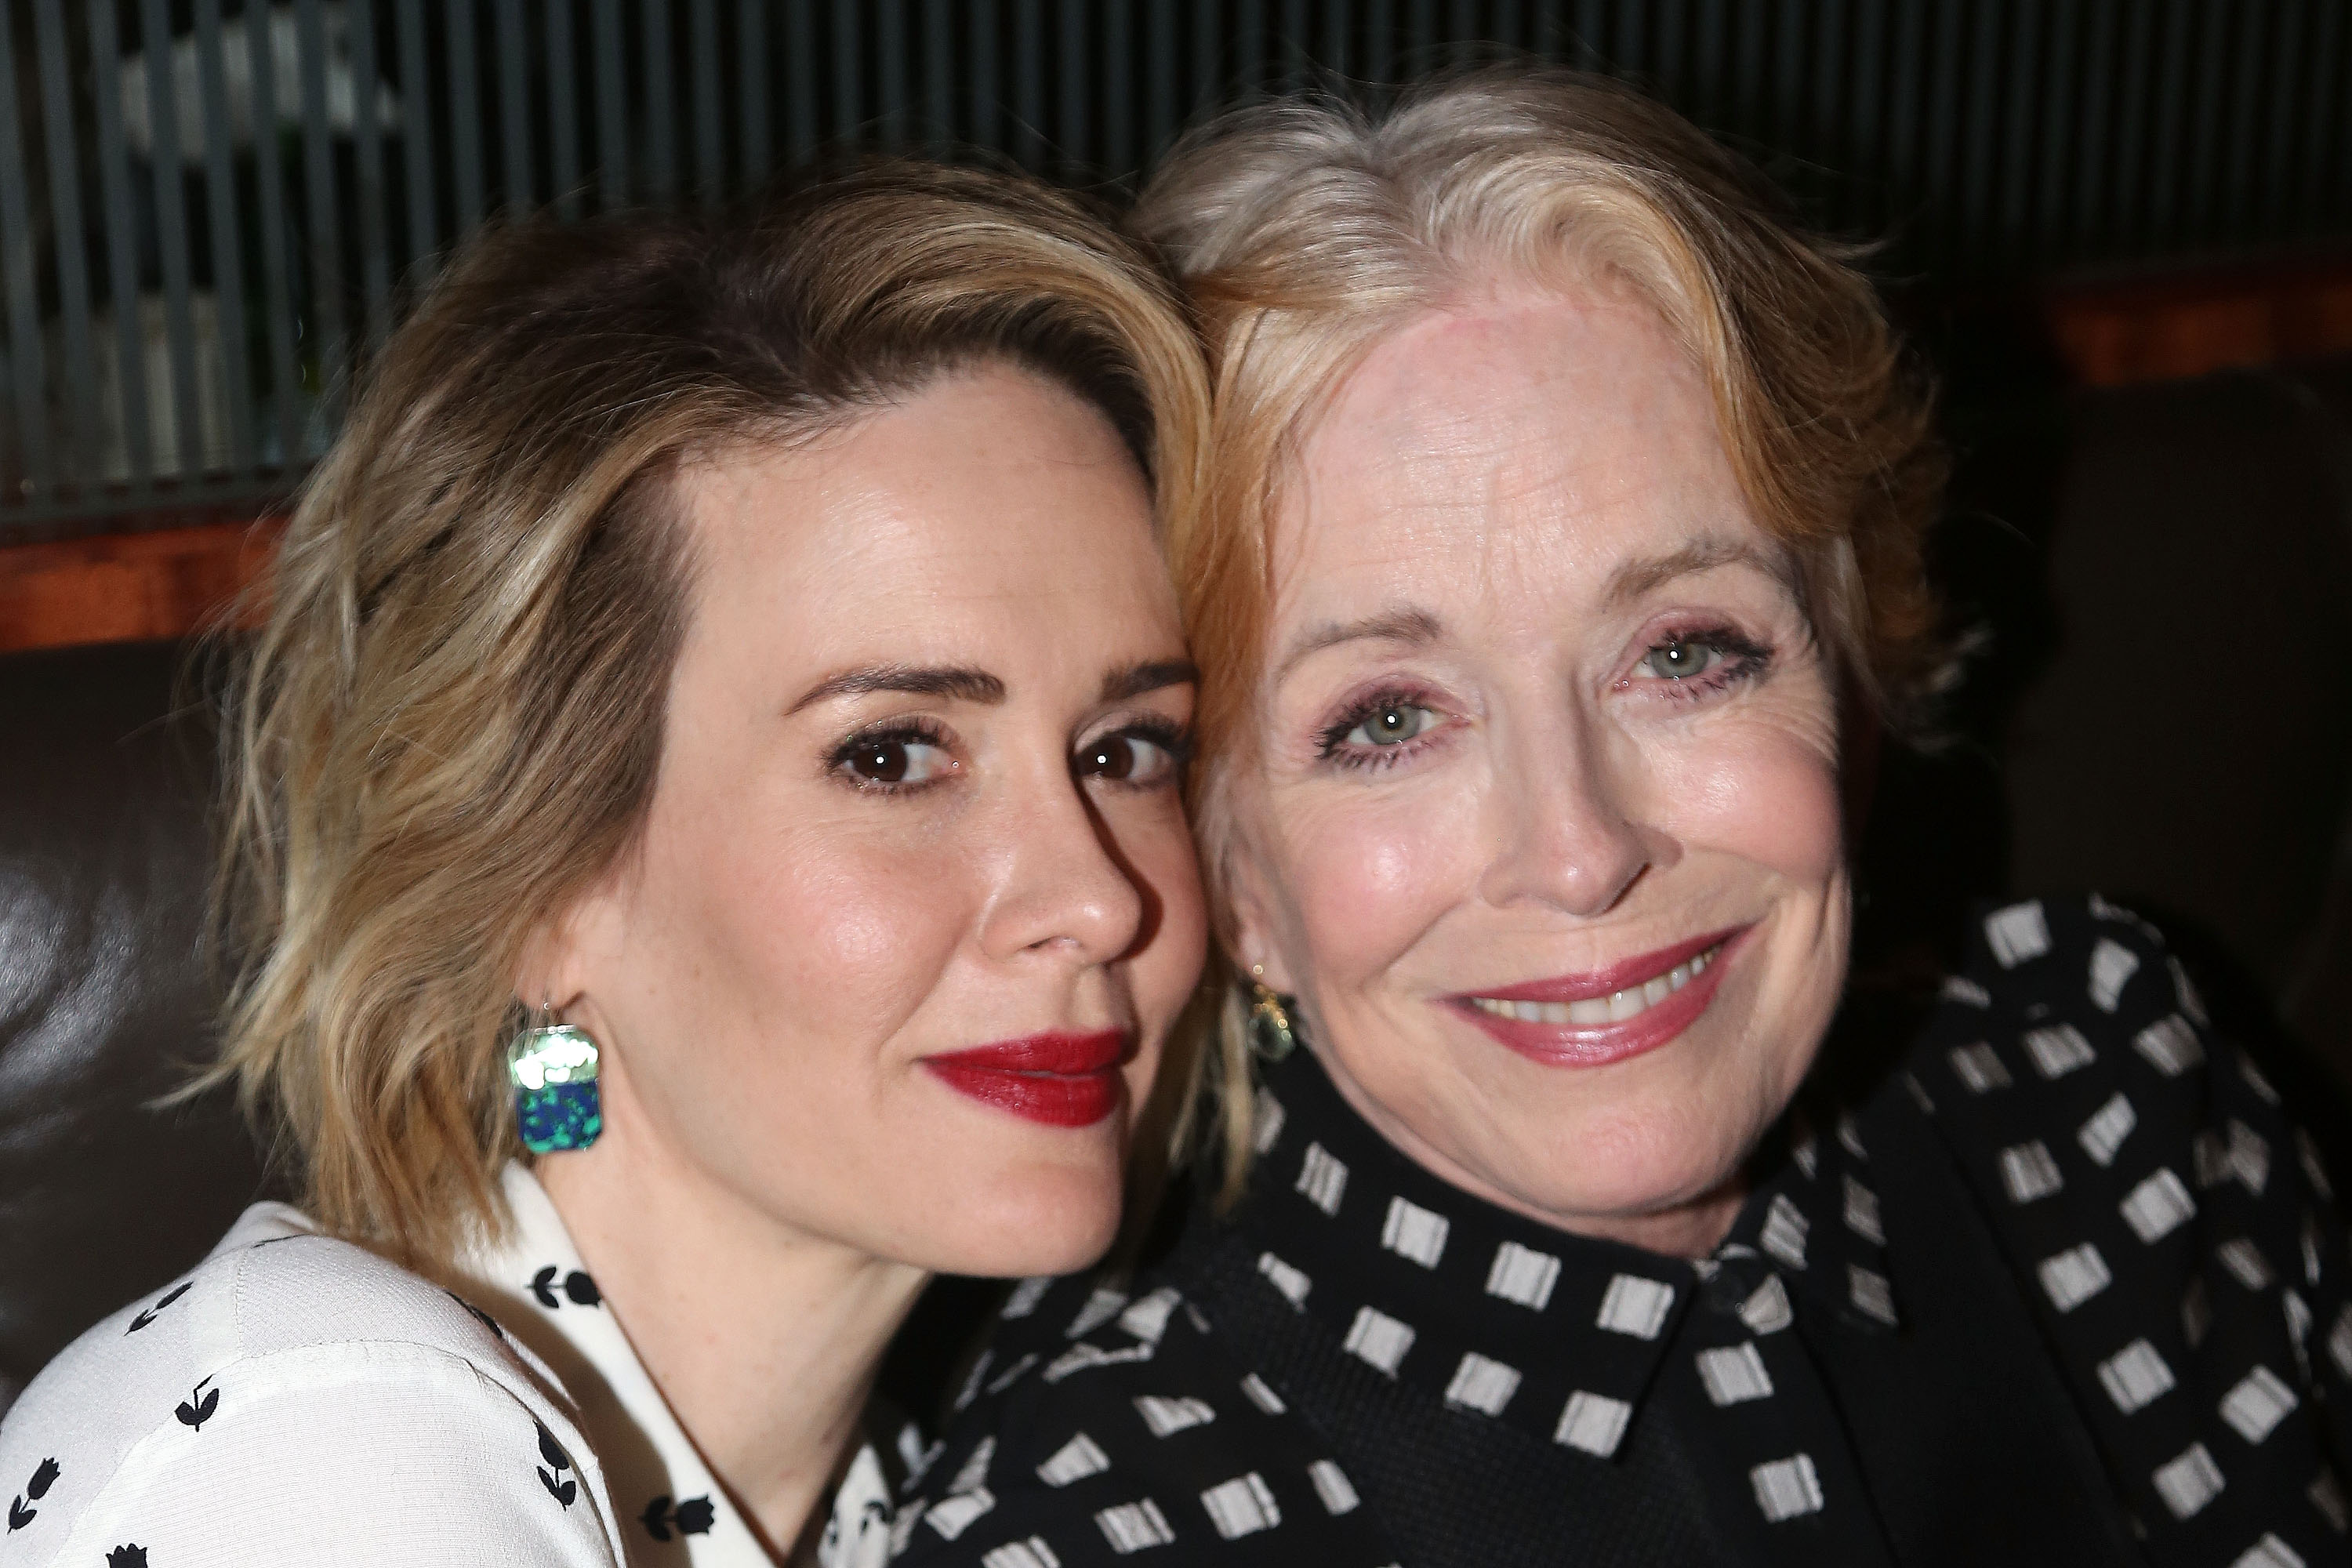 The "American Horror Story" actress and Holland Taylor at the opening night after-party for "Ripcord" on October 20, 2015, in New York City. | Source: Getty Images